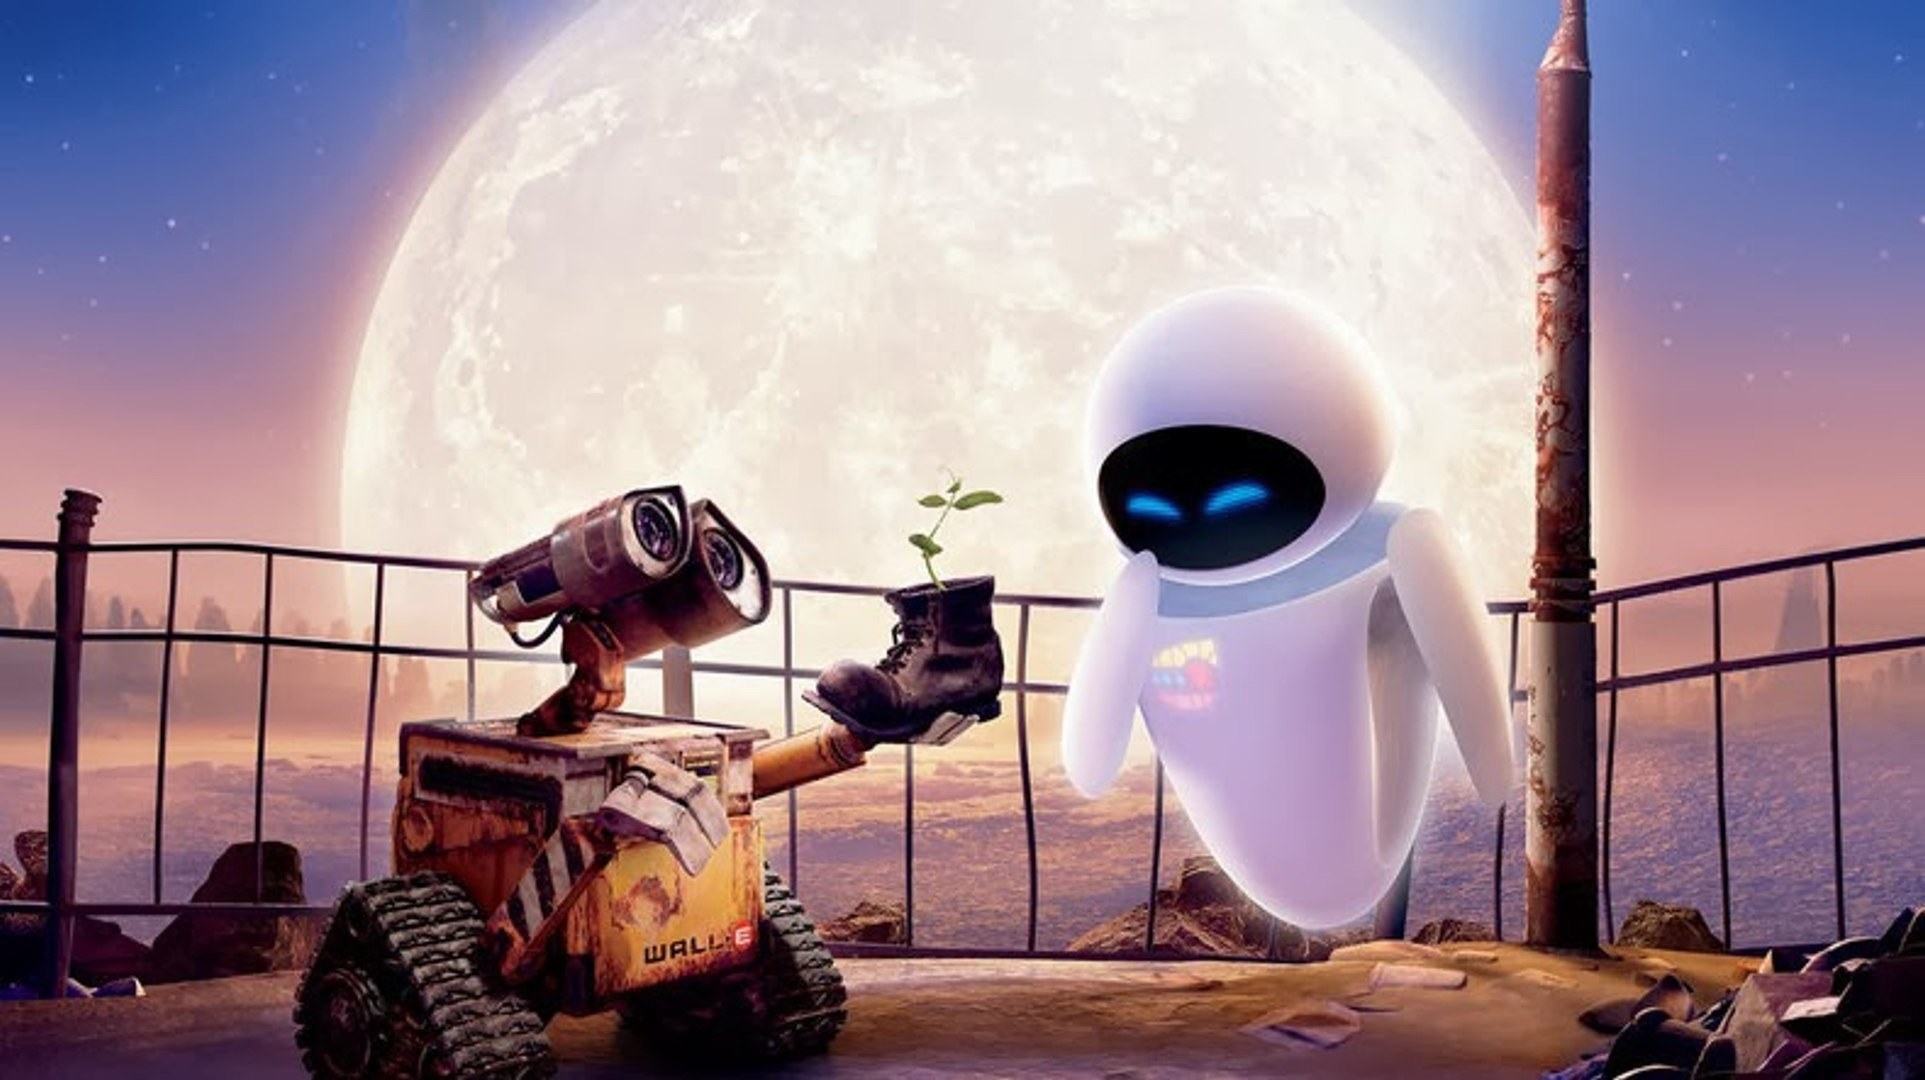 Wall-E offers a small plant to Eve